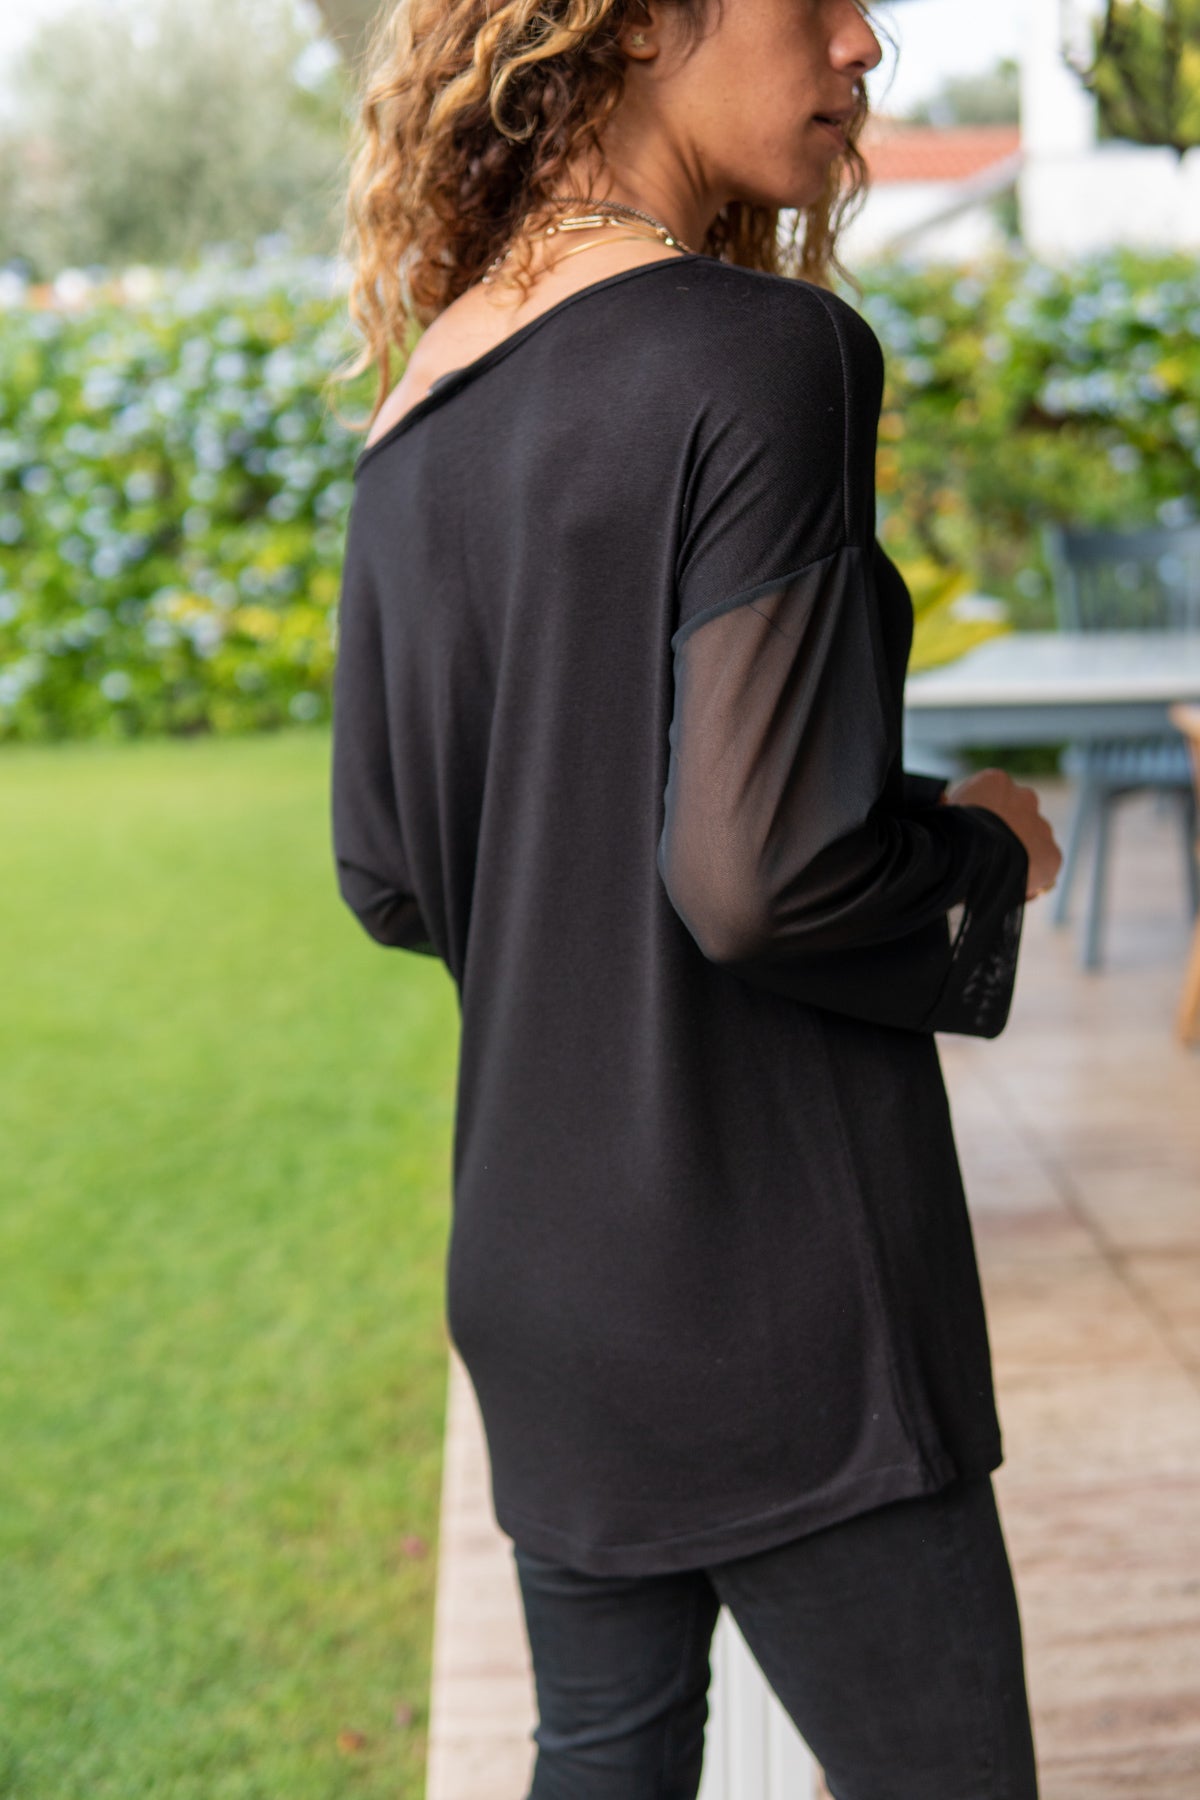 Black Women's Blouse with Sexy Neckline and Sheer Sleeves - Wide Round Neck, Long Sleeves with Special Design Detail